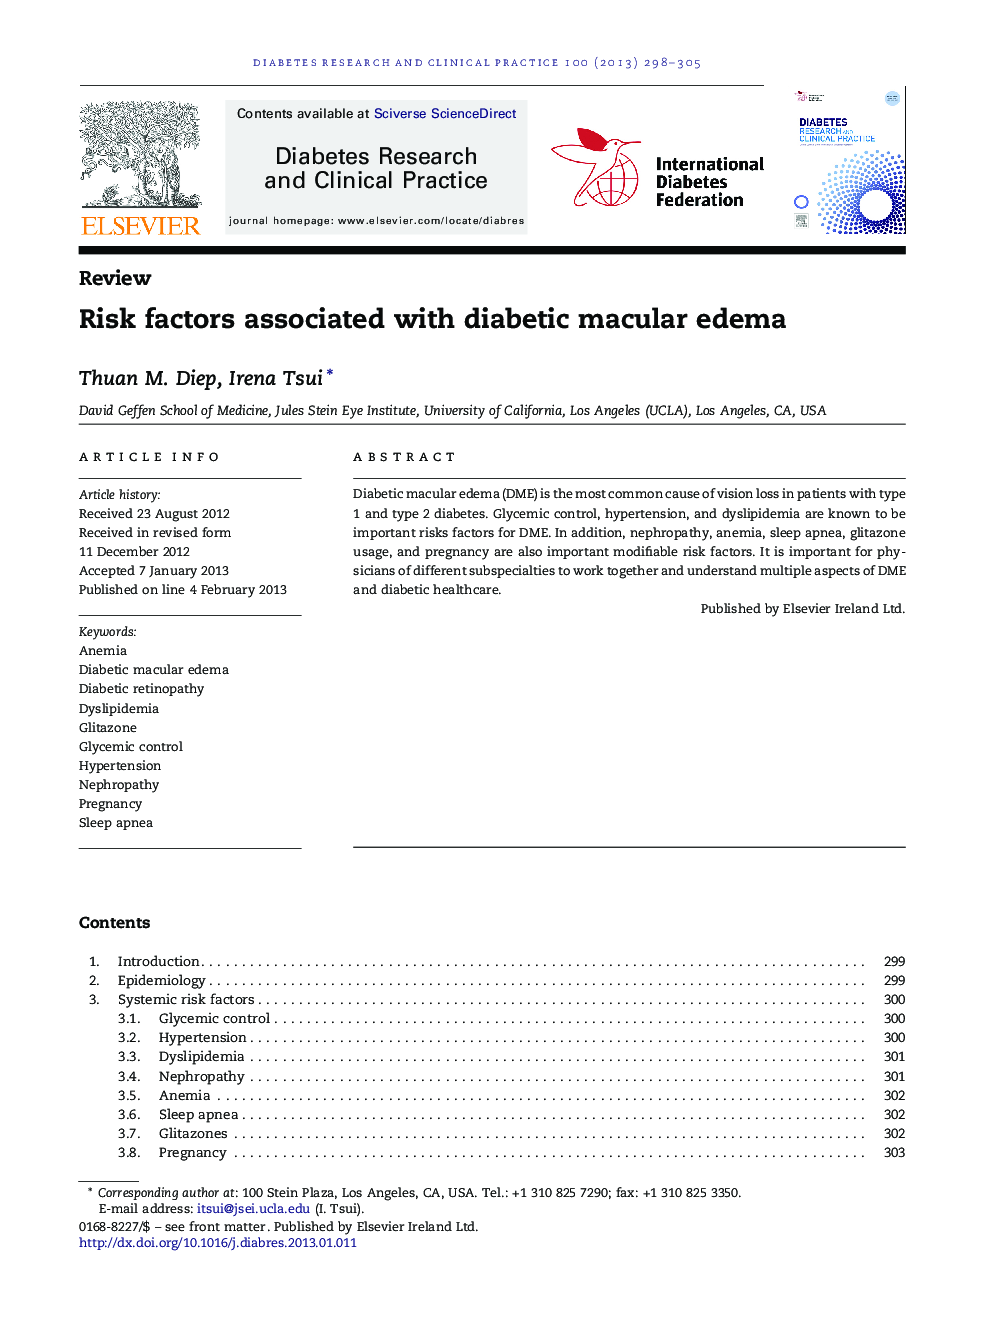 Risk factors associated with diabetic macular edema